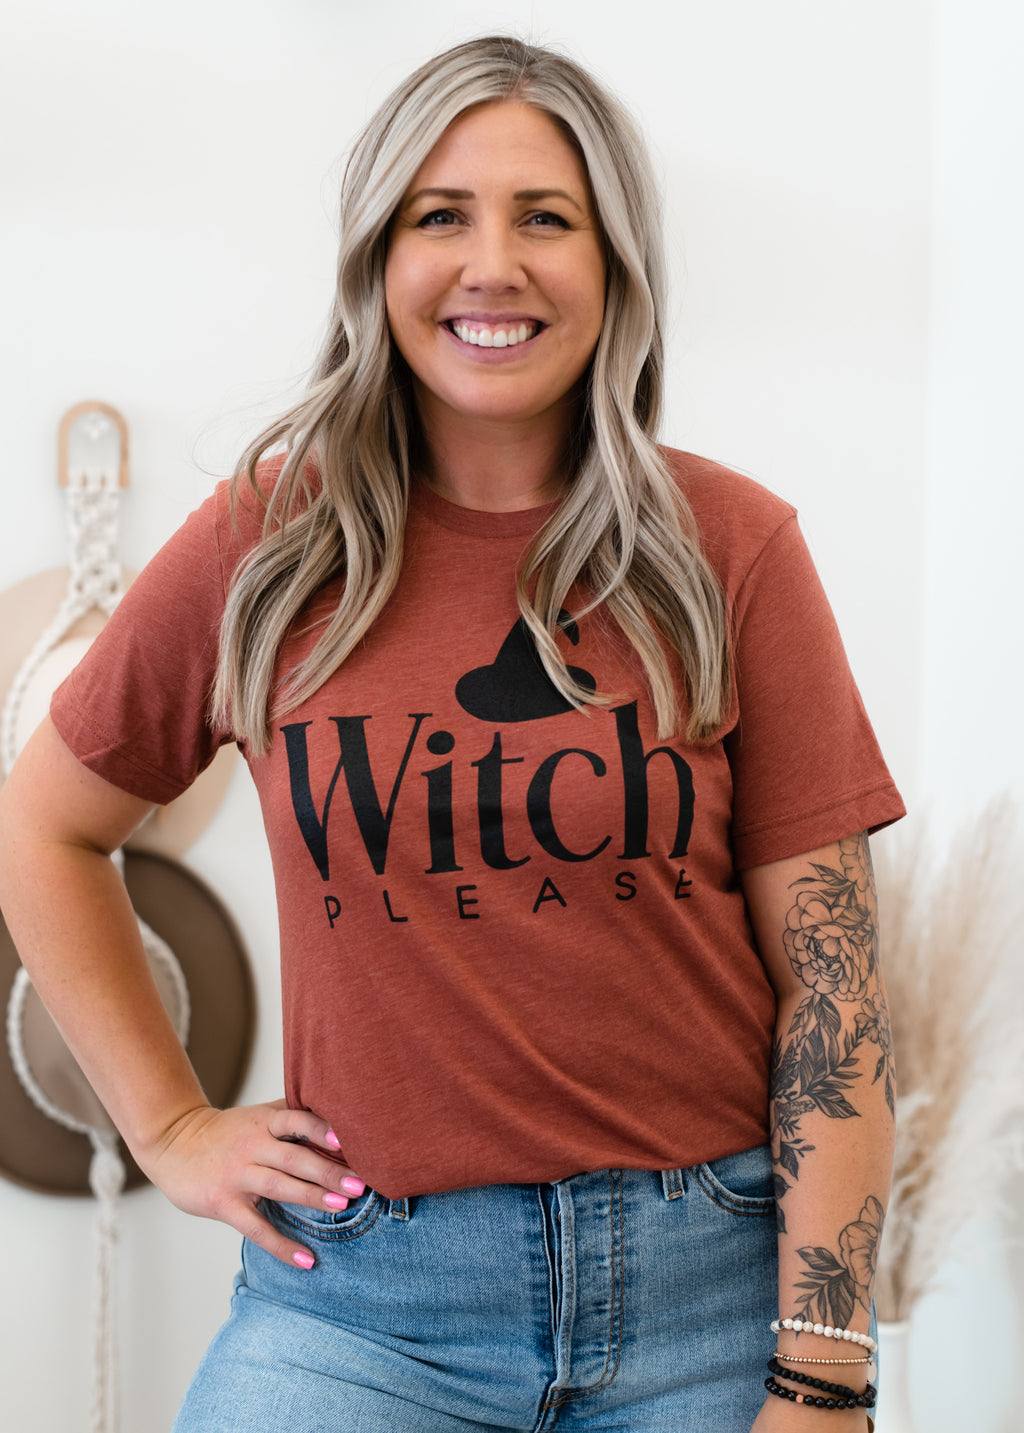 The Witch Please Tee